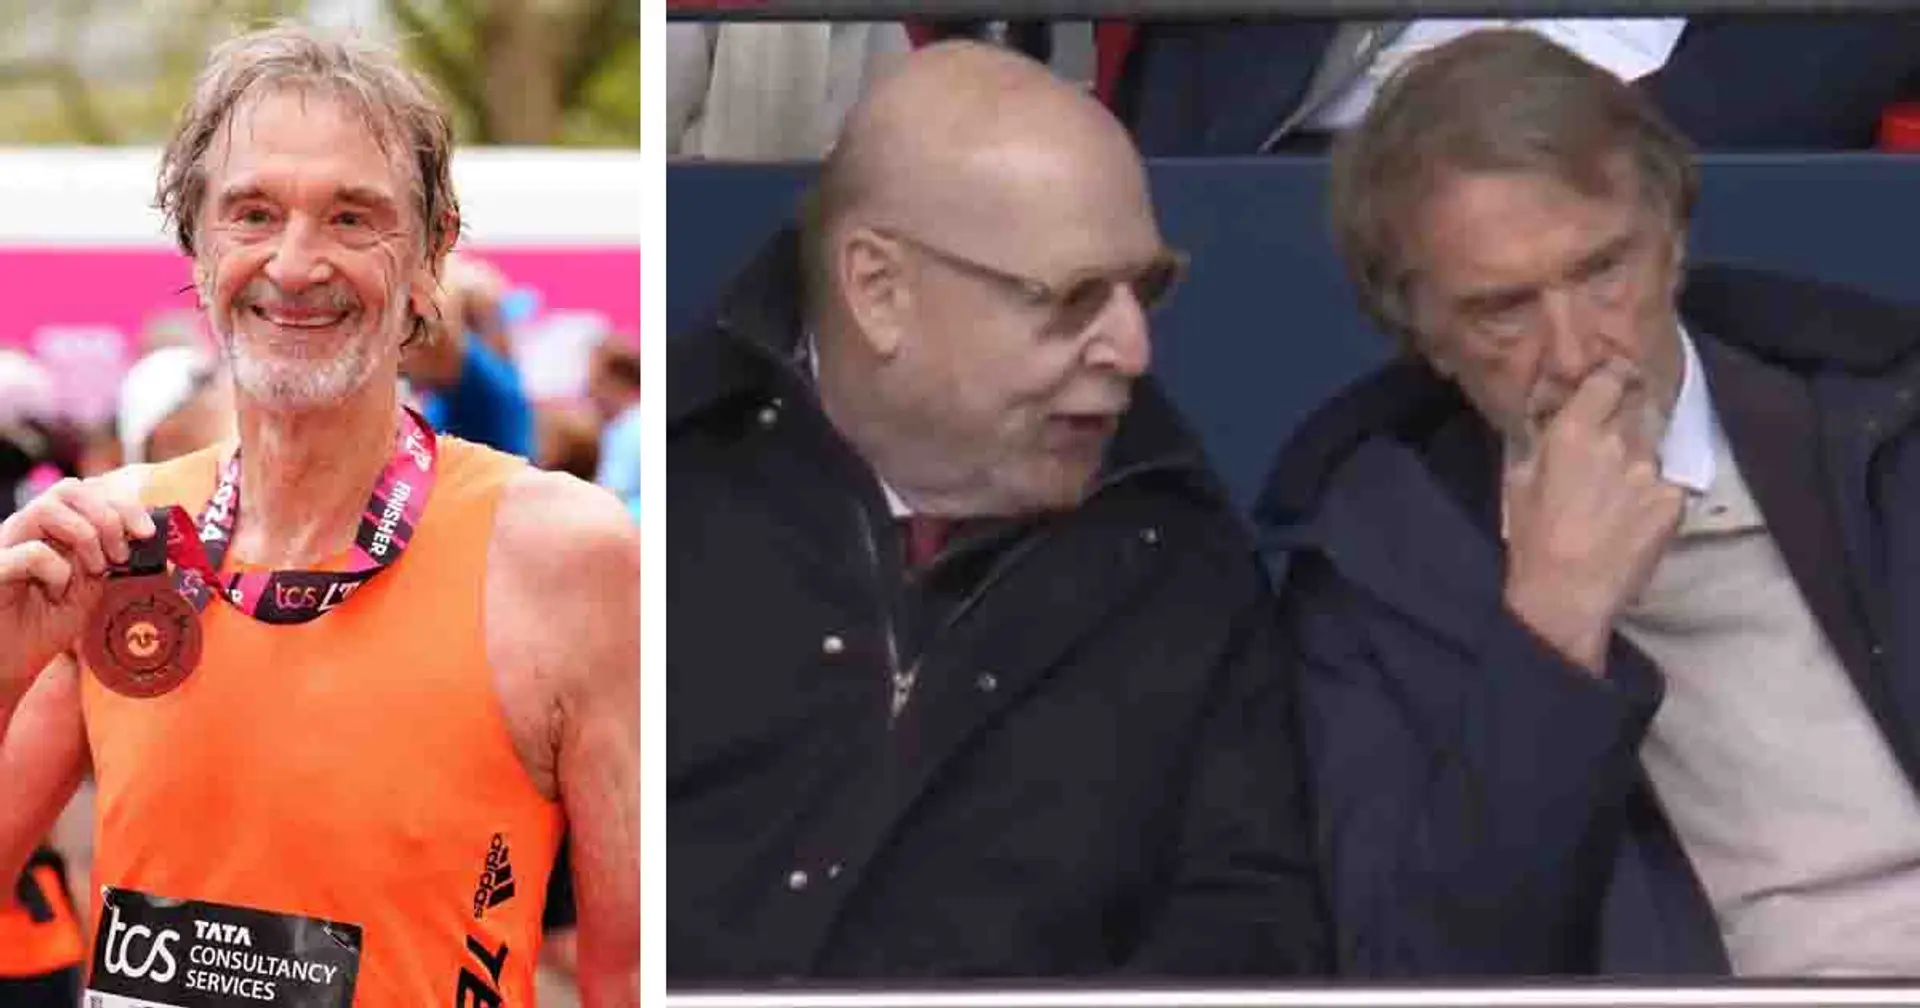 70-year-old Sir Jim Ratcliffe sets personal record in London Marathon before rocking up at Wembley to watch Man United